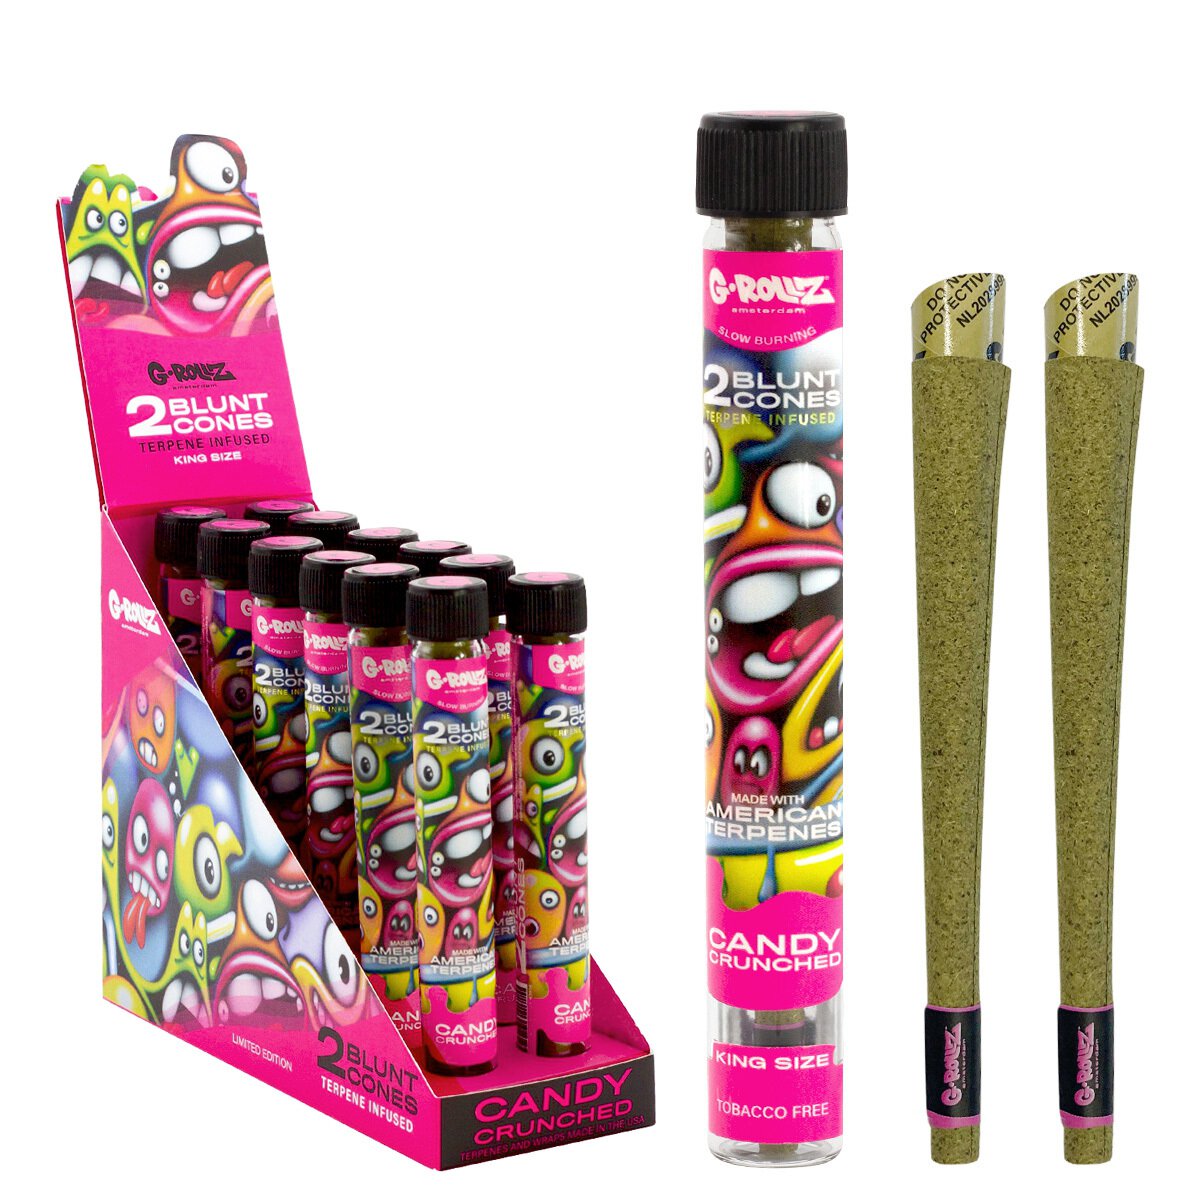 G-Rollz | Terpene Infused Blunt Cones 'Candy Crunched'